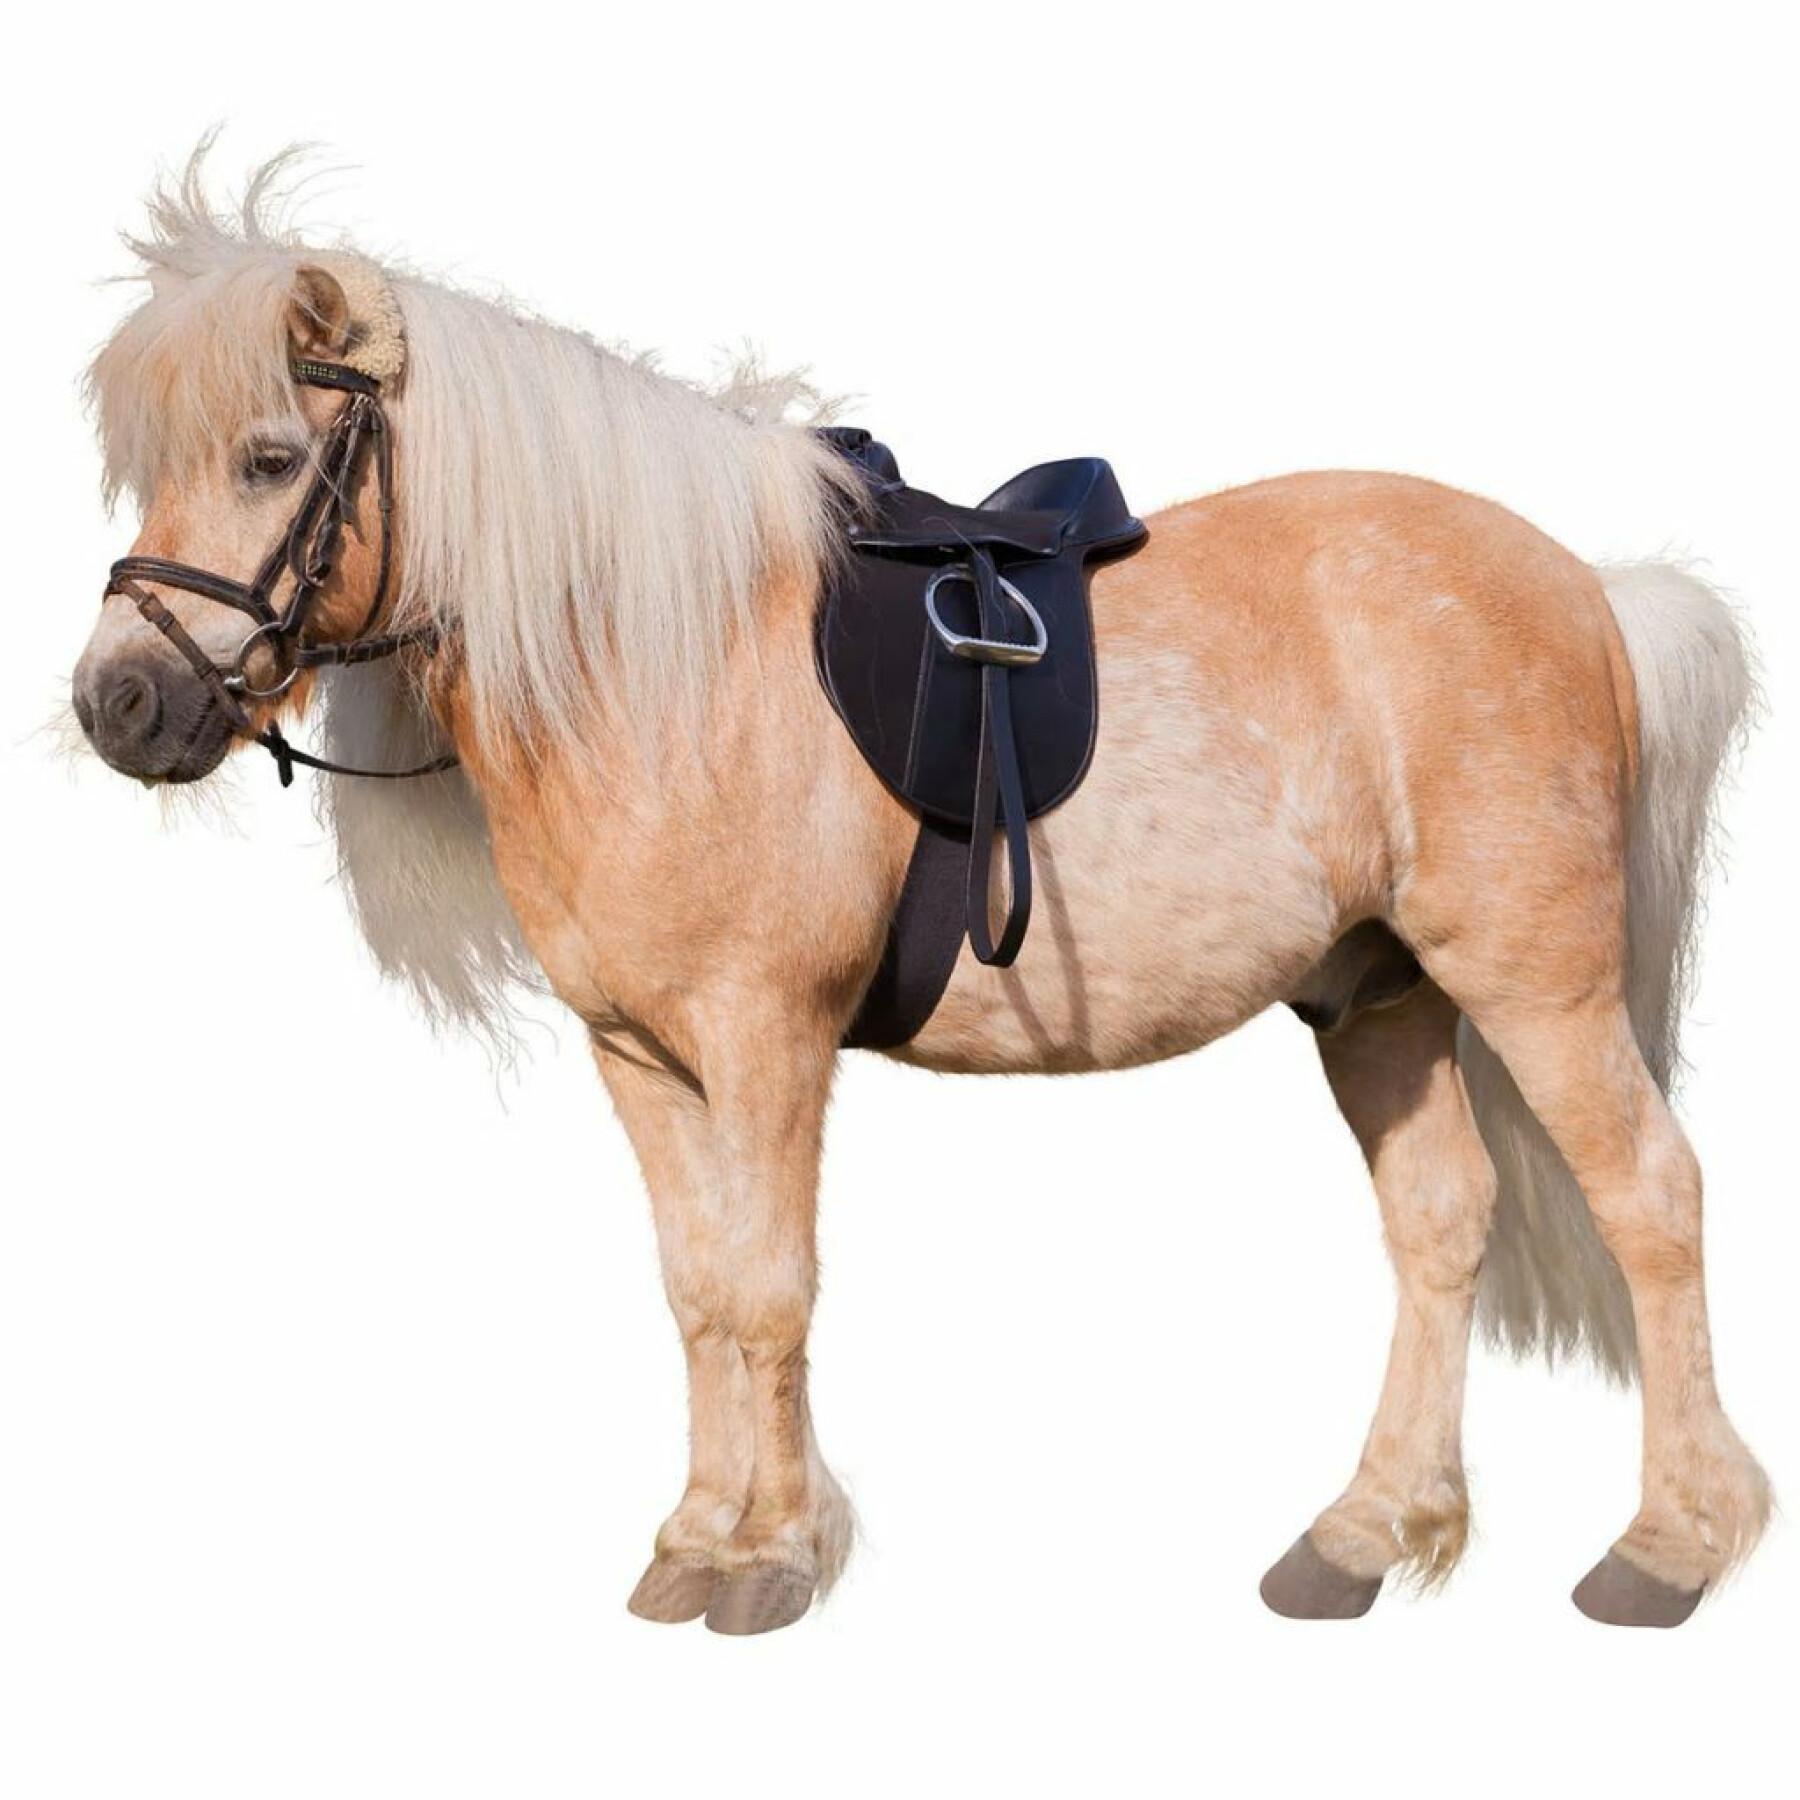 Equipped bardette Kerbl economy pony